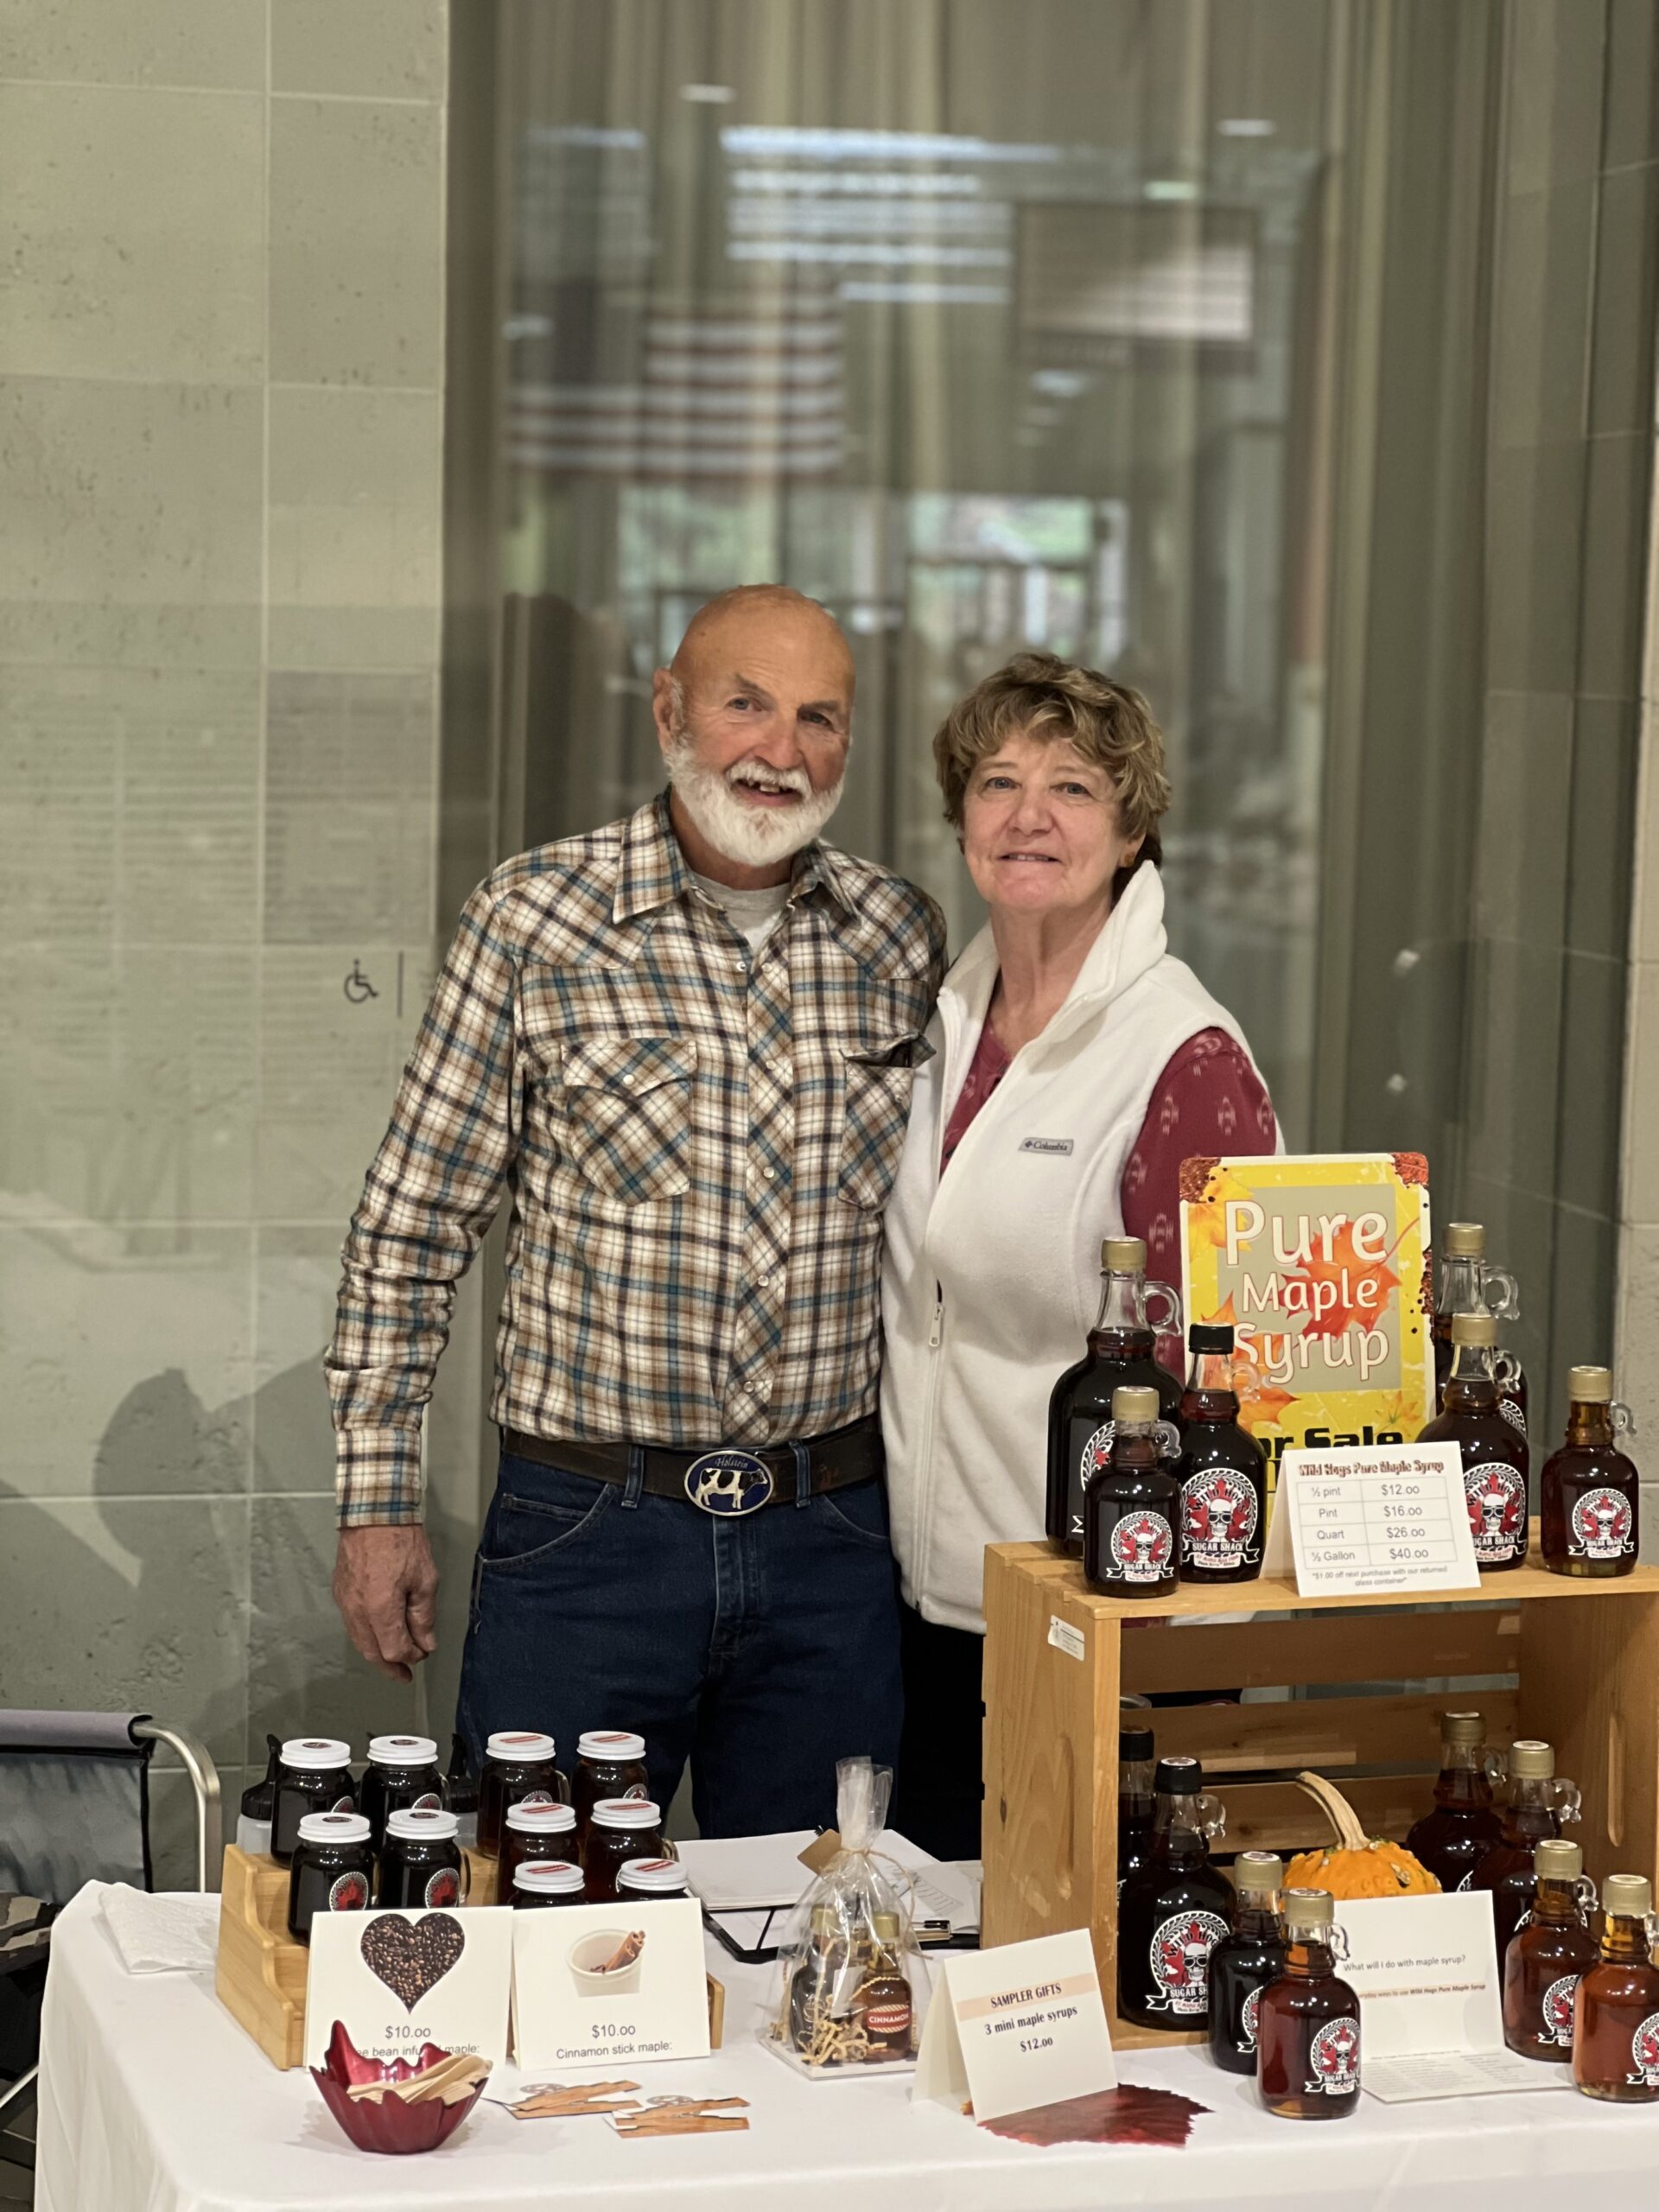 Couple selling maple syrup at local market booth.